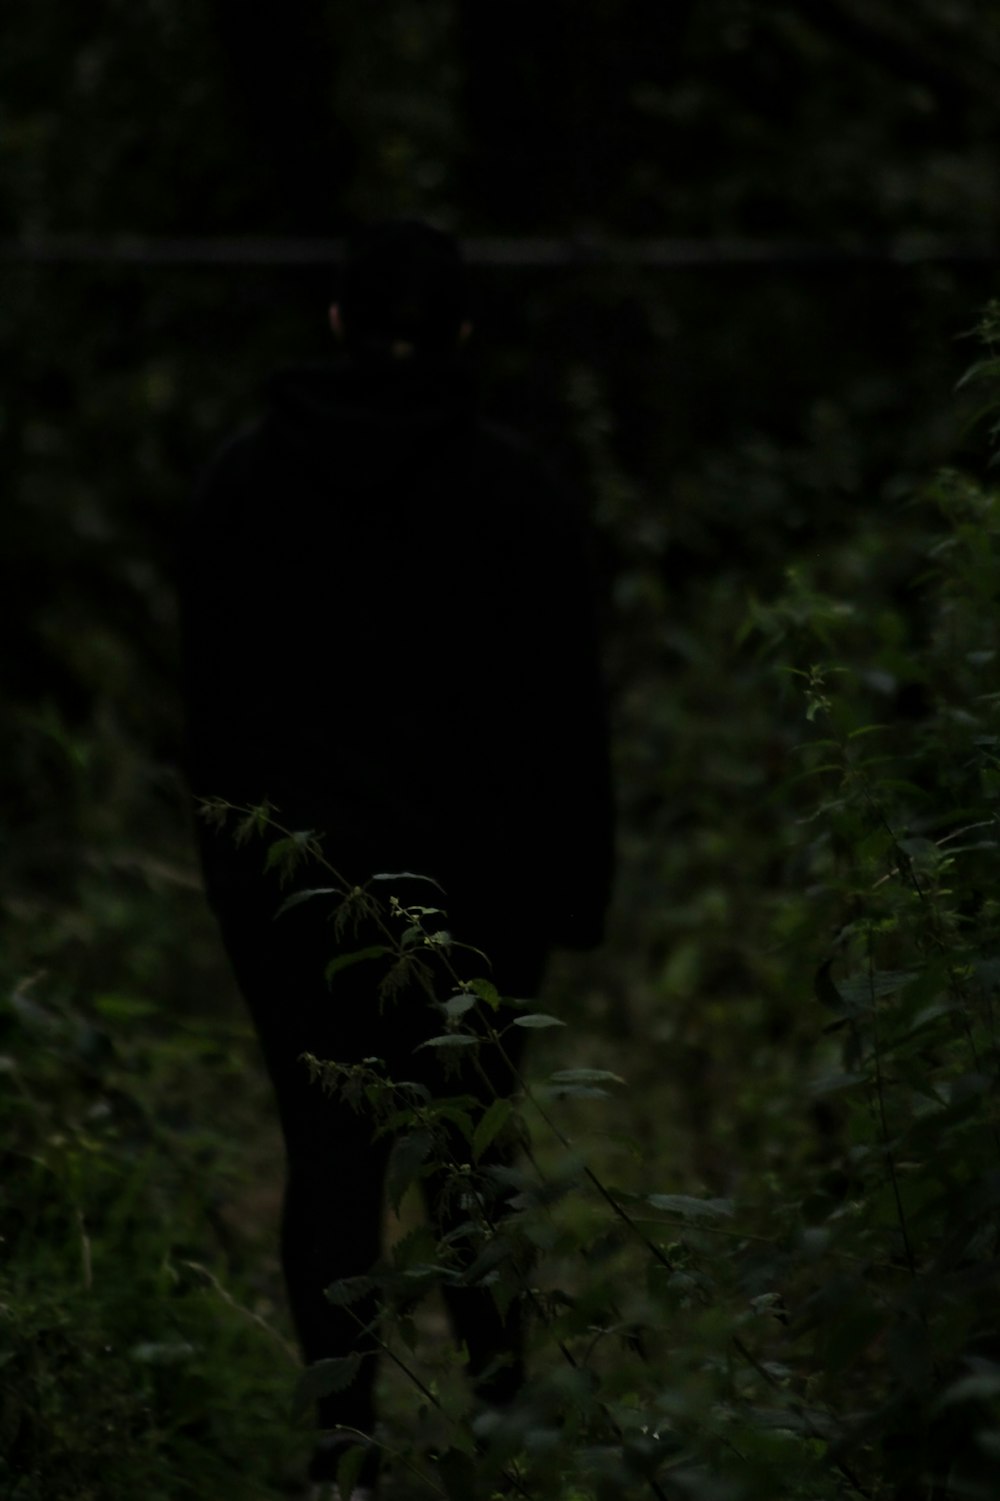 a black cat walking through a forest at night